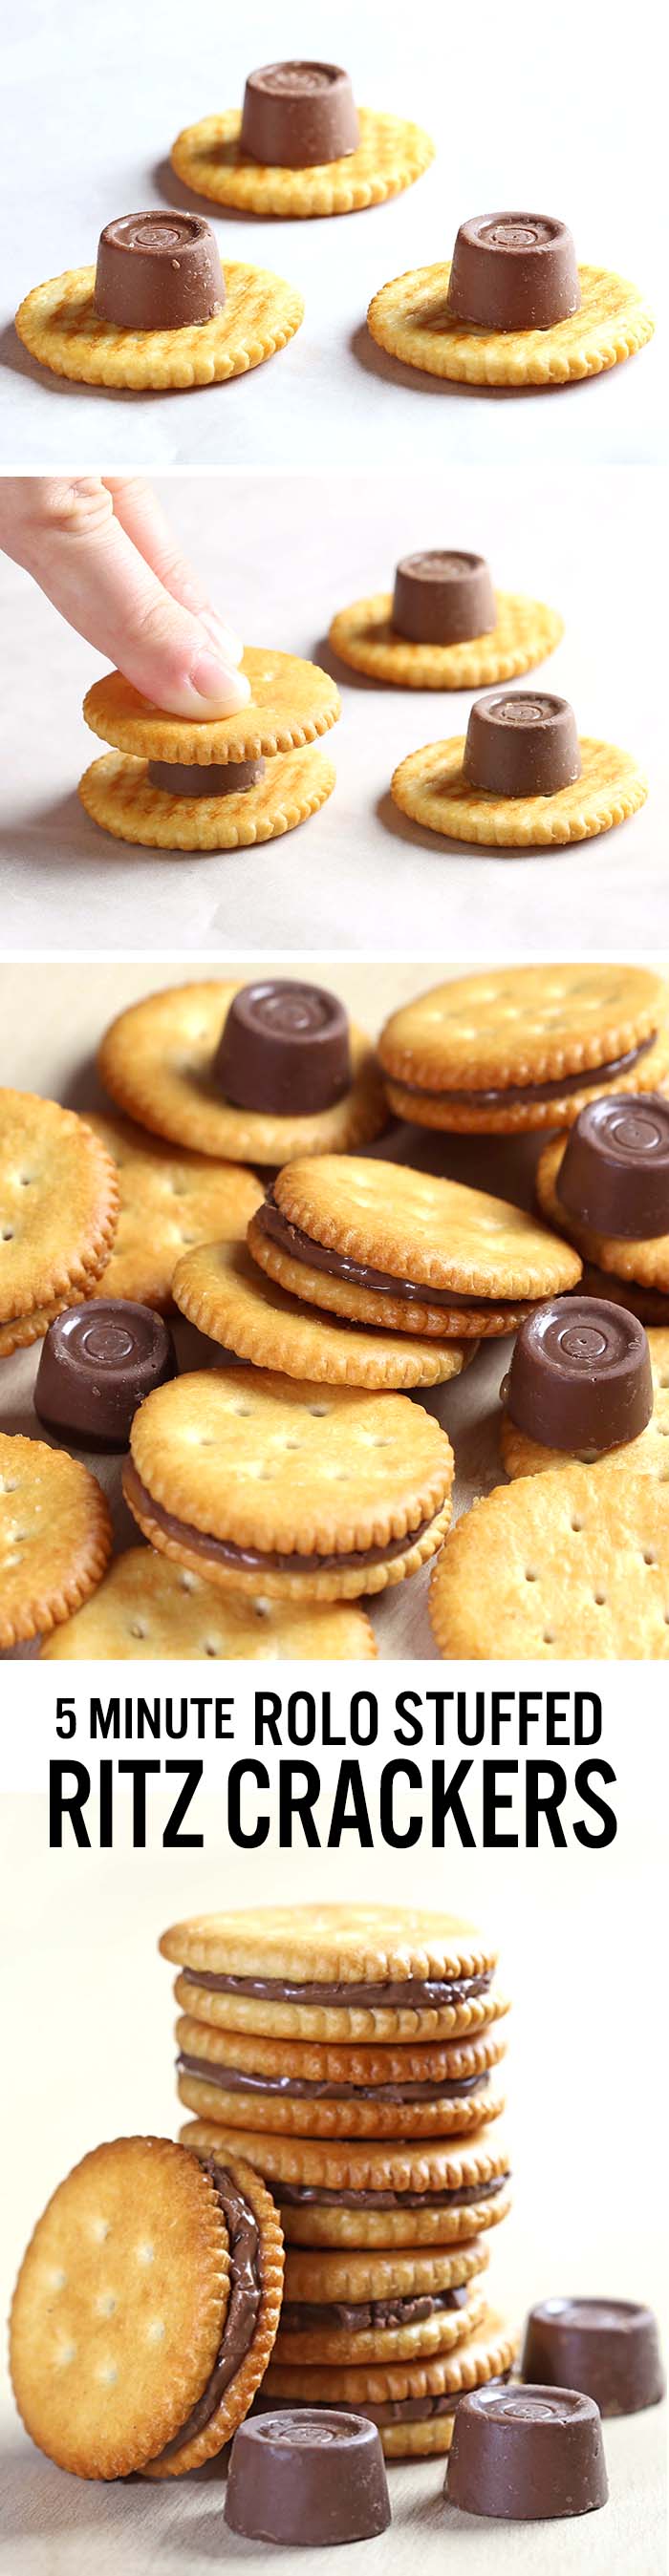 Rolo stuffed Ritz crackers - an awesomely easy-to-make salty-sweet, caramel-chocolate combo. Trust me. A match made in Heaven.